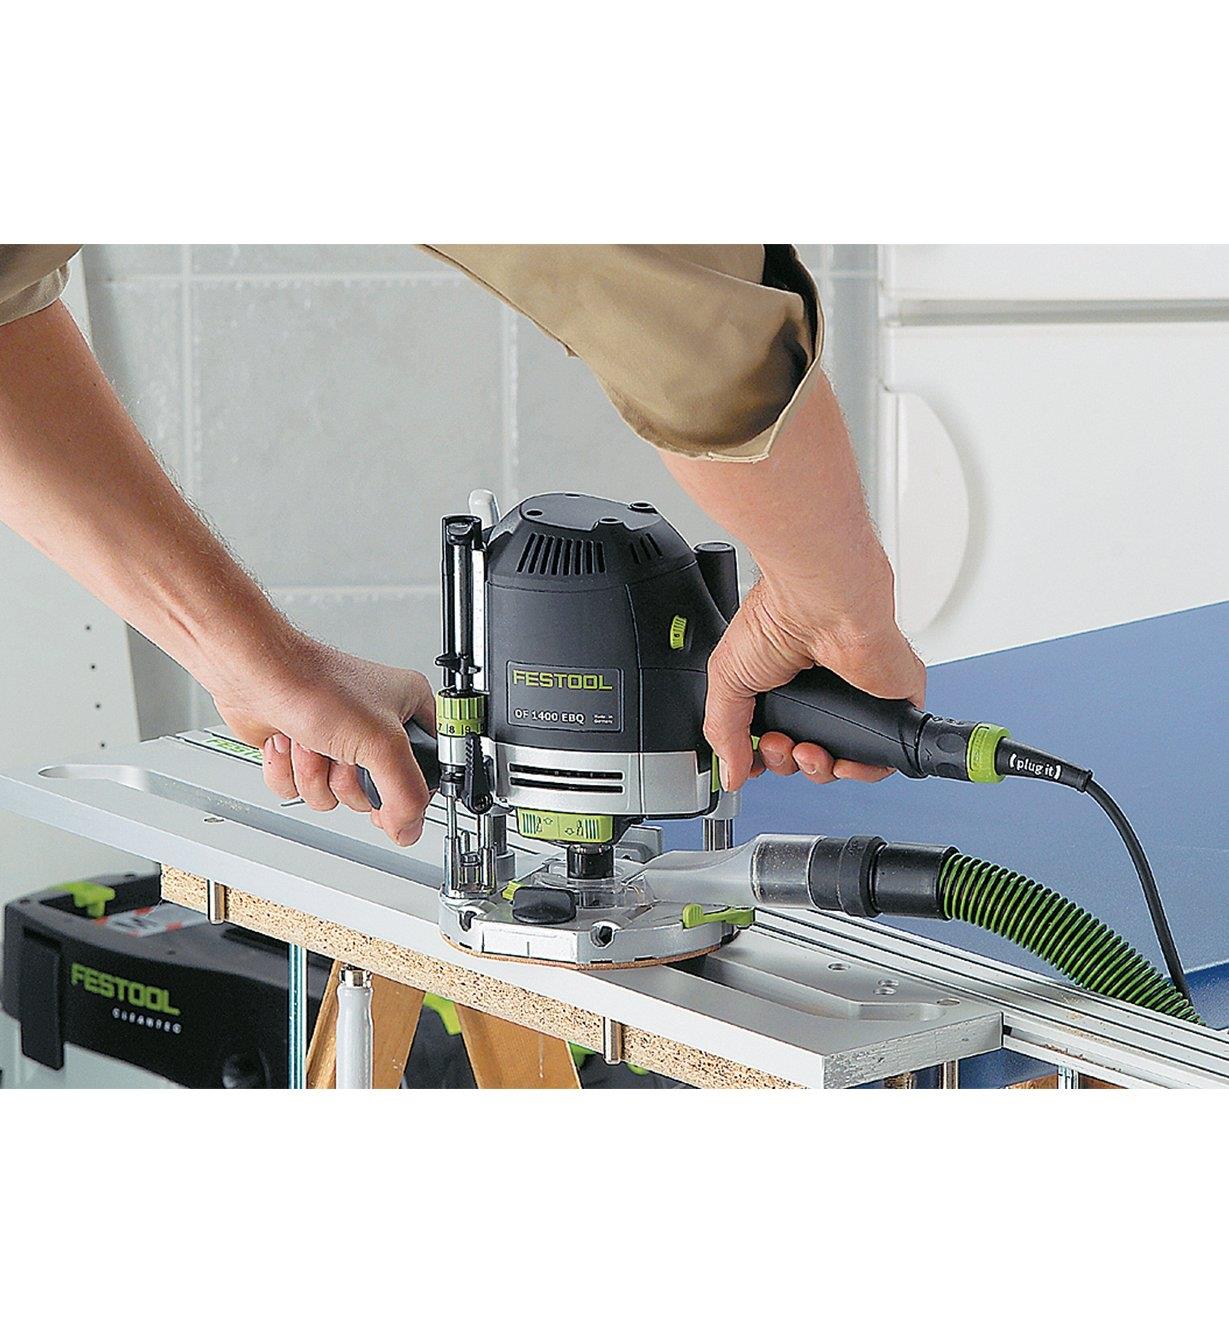 Festool Emerald Edition OF 1400 EQ Router - Lee Valley Tools